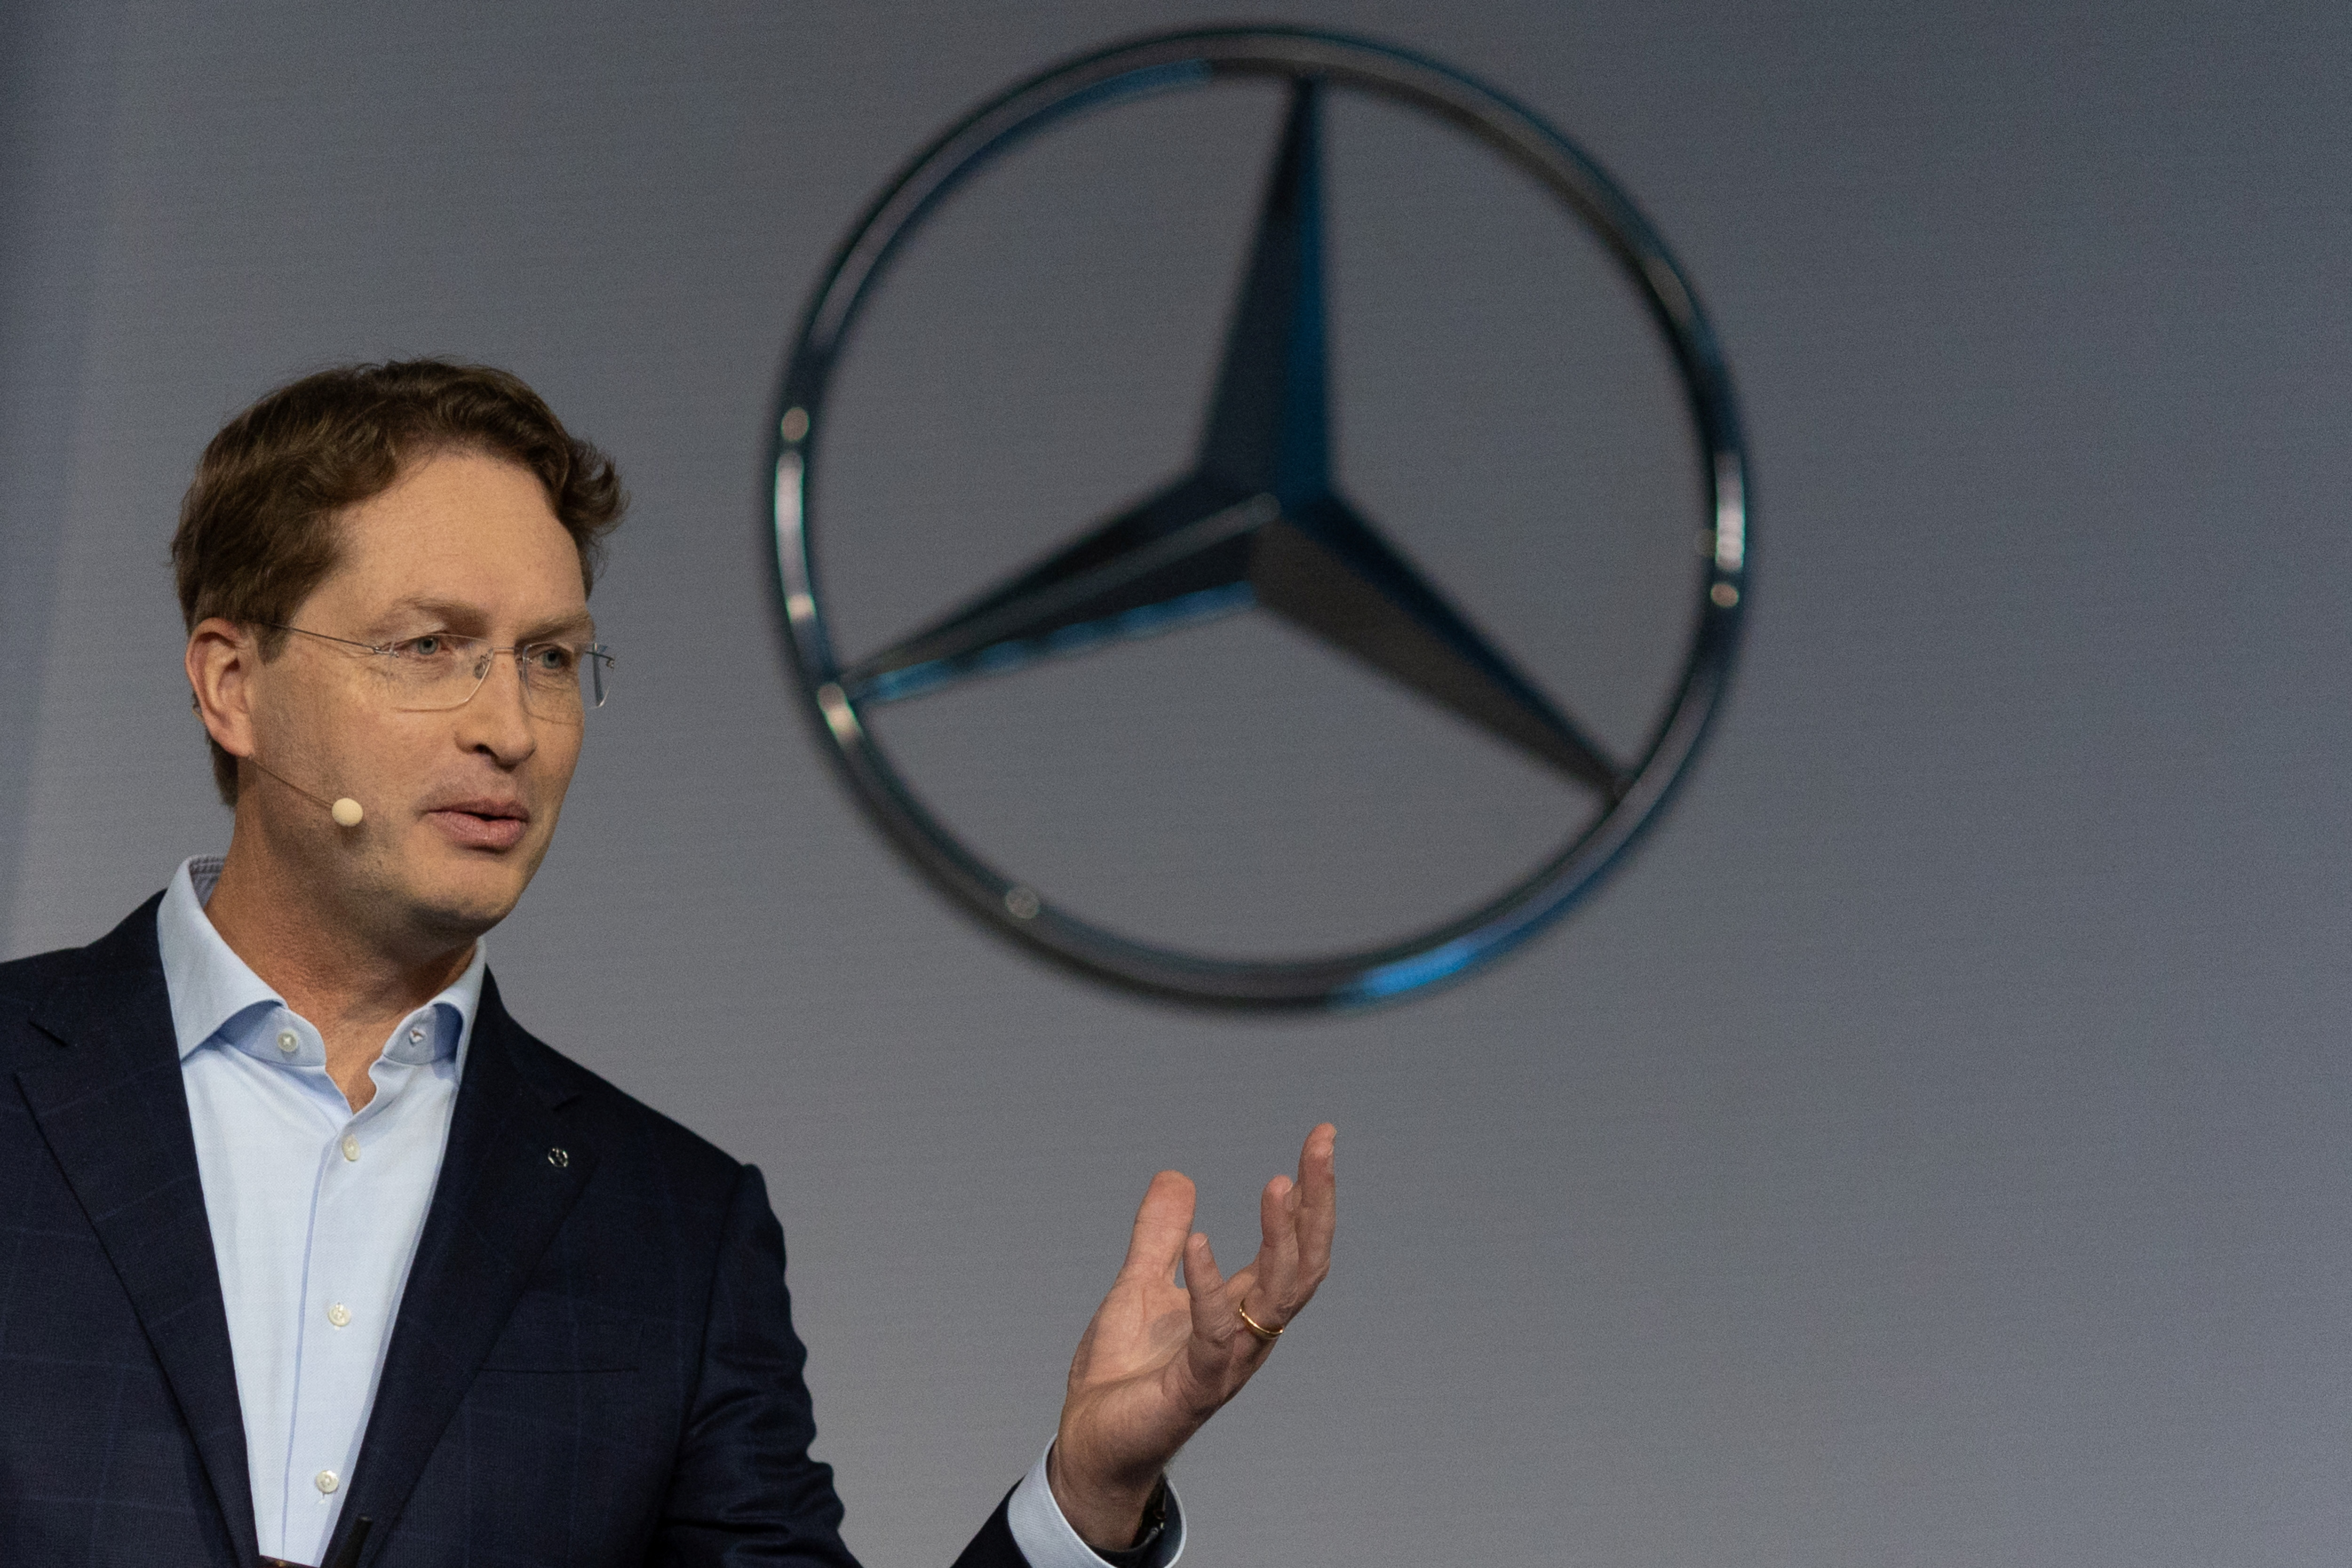 Mercedes-Benz holds a strategy update event focused on software in California